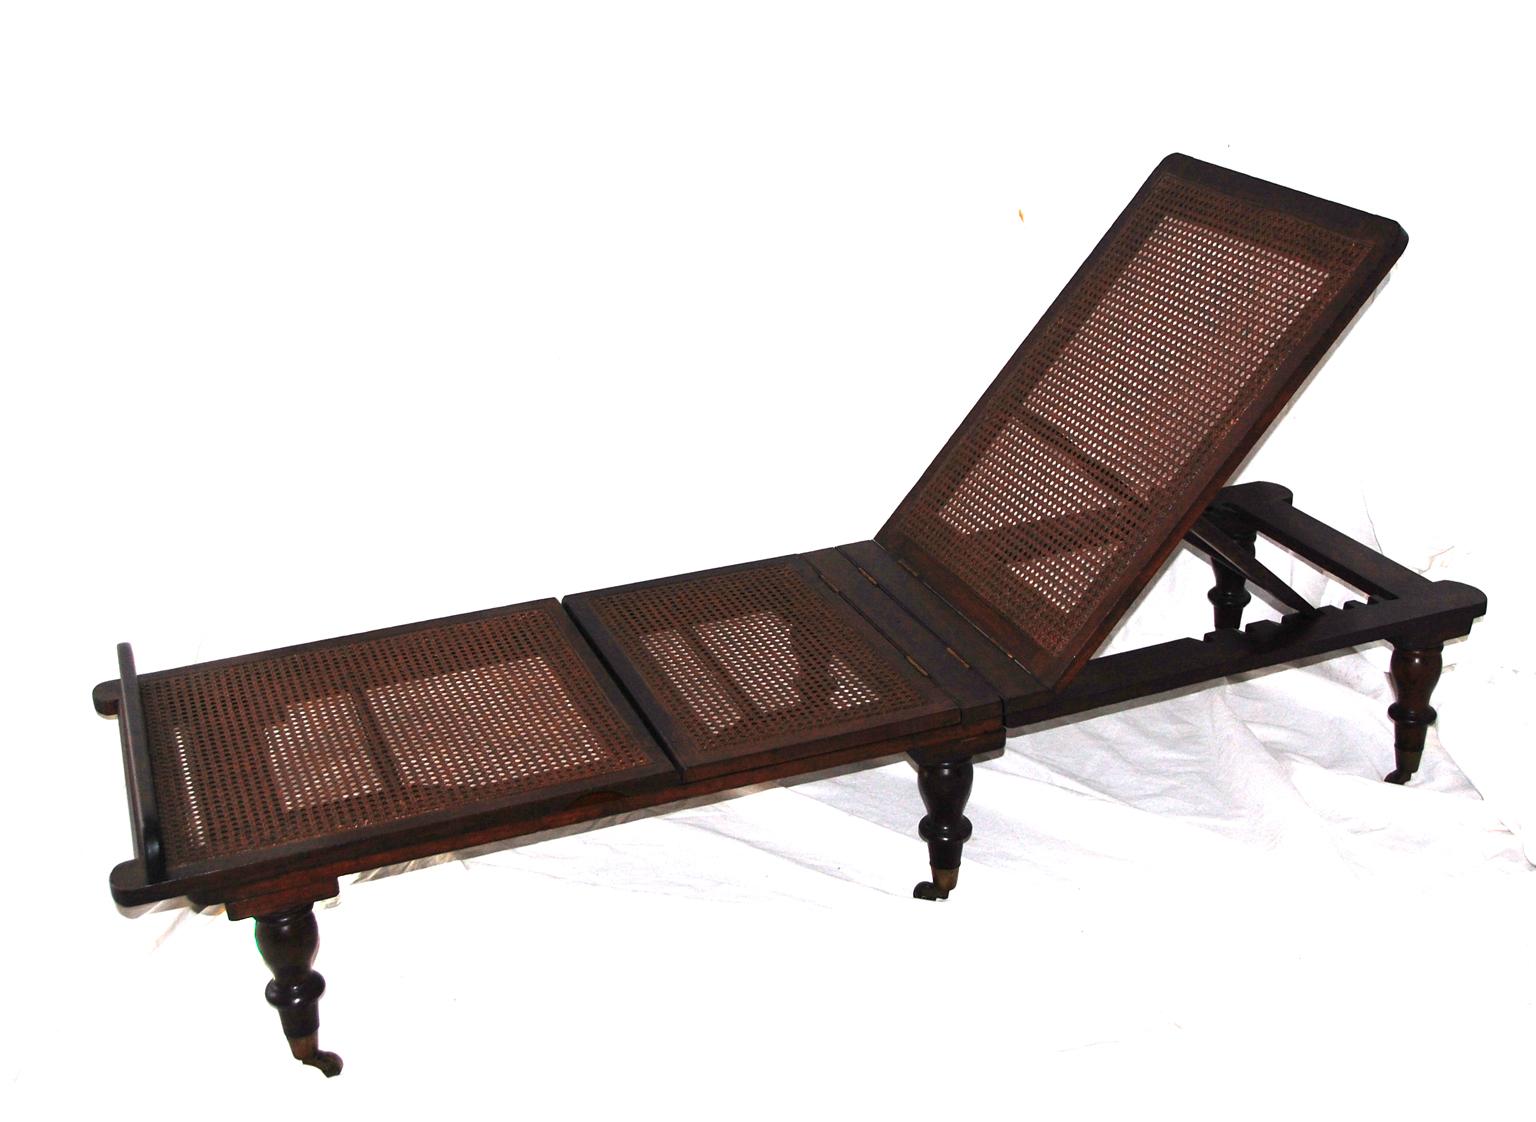 English campaign chaise lounge in mahogany with linen cushions. This folding lounge, made for a military officer is extremely adjustable. It can be used totally flat as a bench or even a coffee table or both the top and two sections of the bottom of